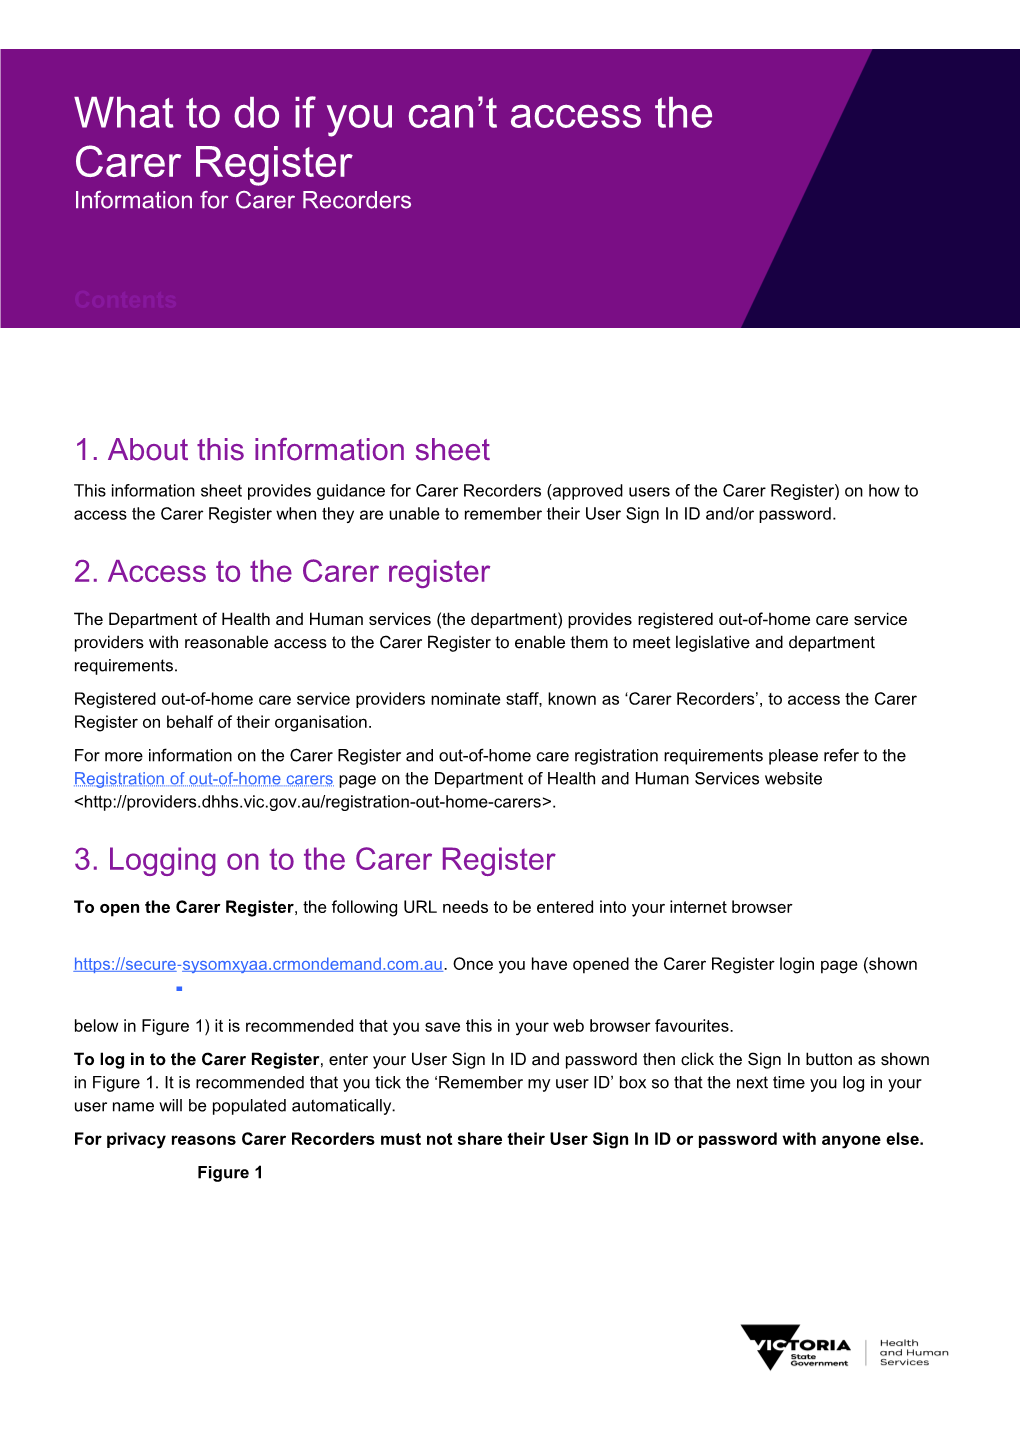 What to Do If You Can't Access the Carer Register , Information for Carer Recorders